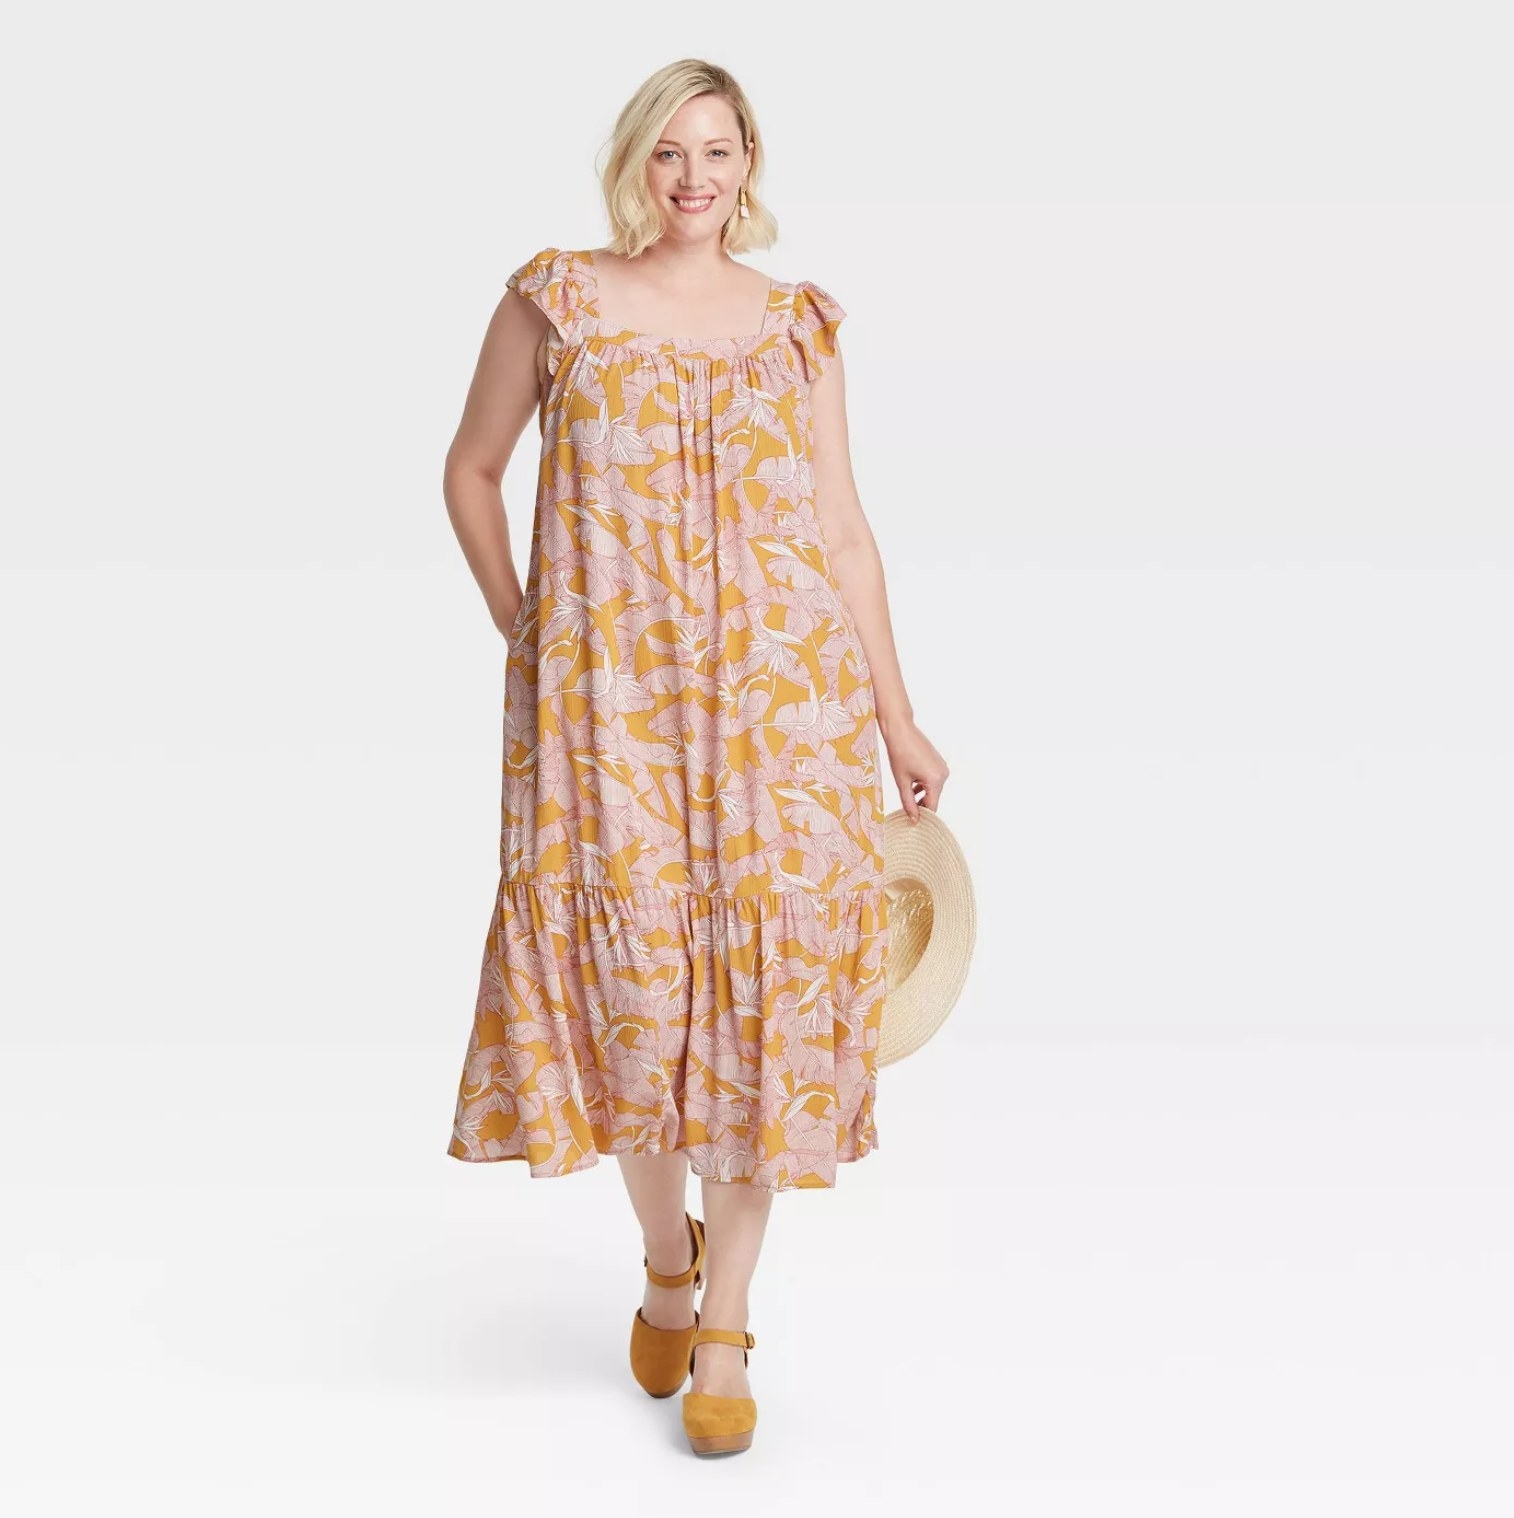 Model wearing the pink and orange patterned dress carrying a sunhat and wearing mustard shoes